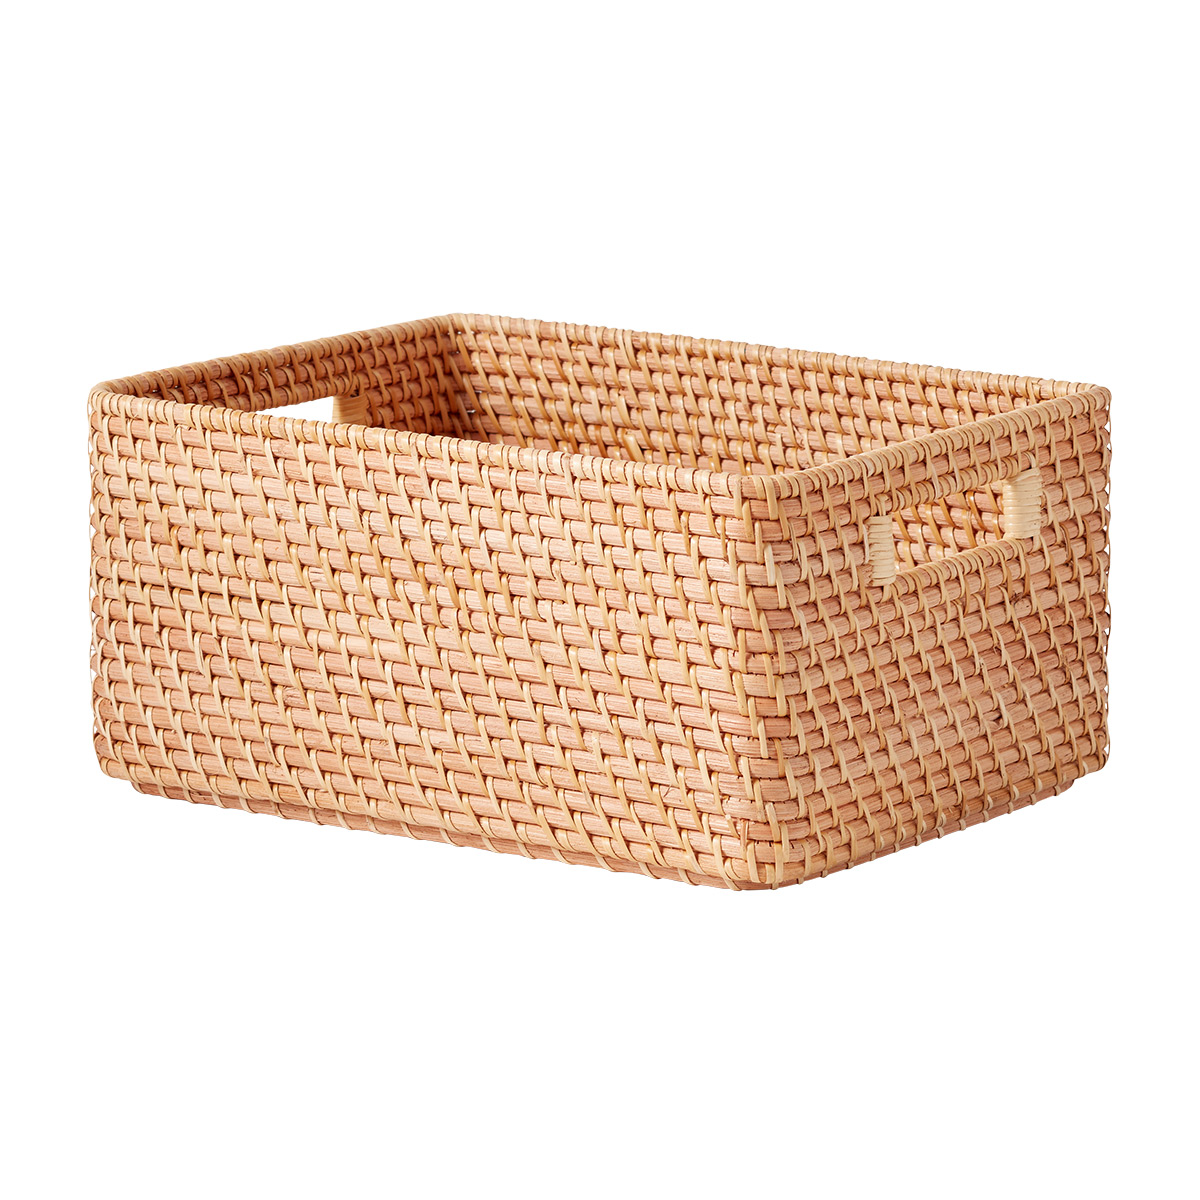 Essentials Small Rectangular Baskets with Handles, 9.5x6.75x4.25 in.